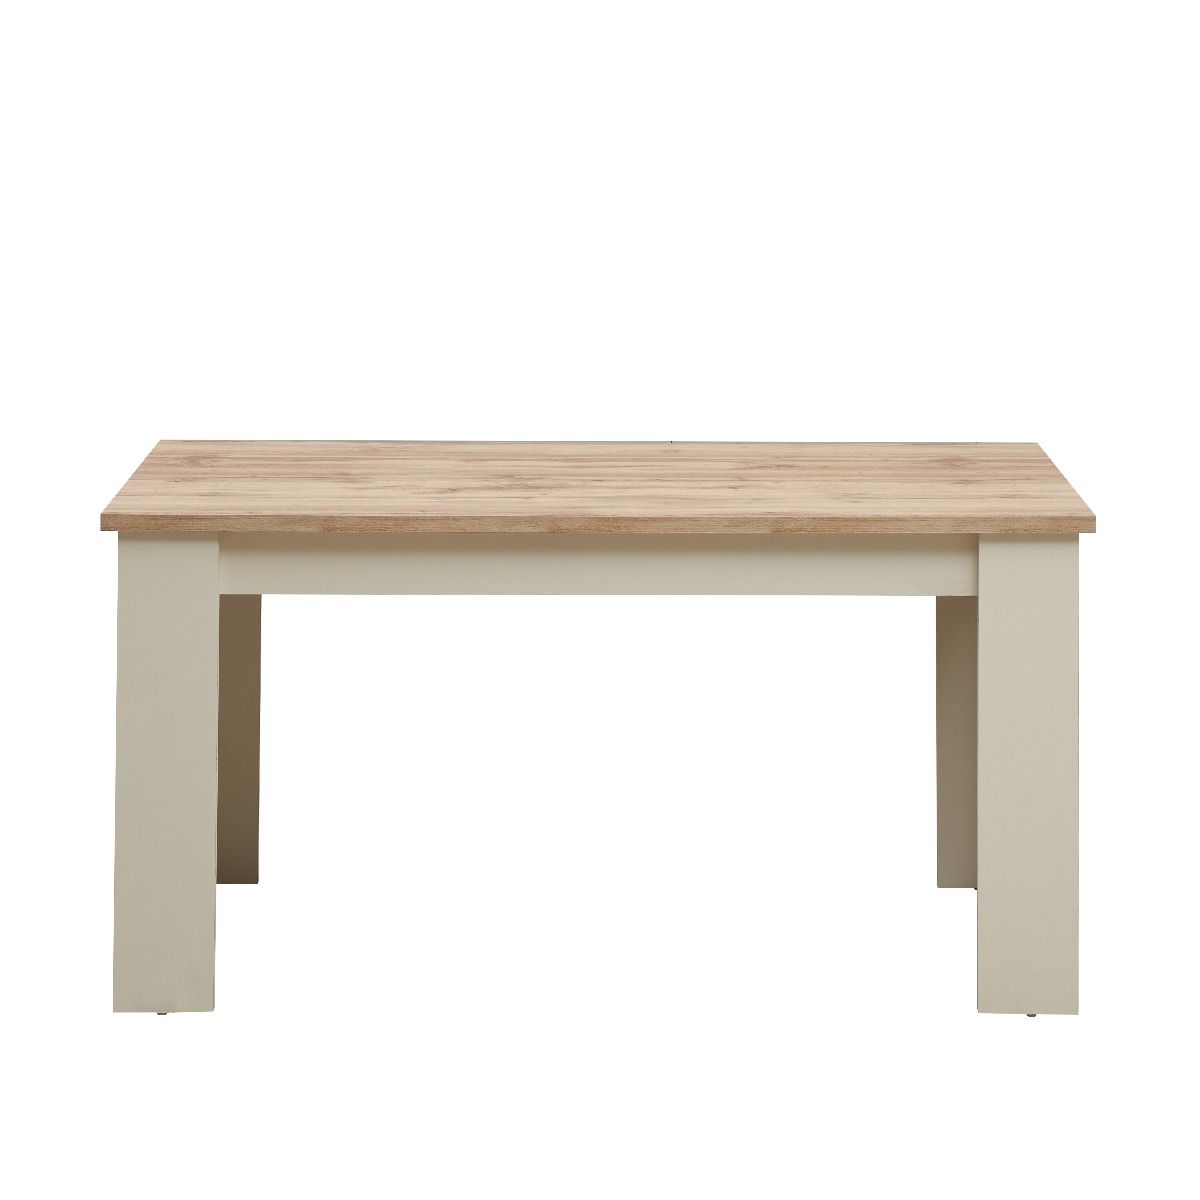 Lisbon cm Dining Table Benches allhomely